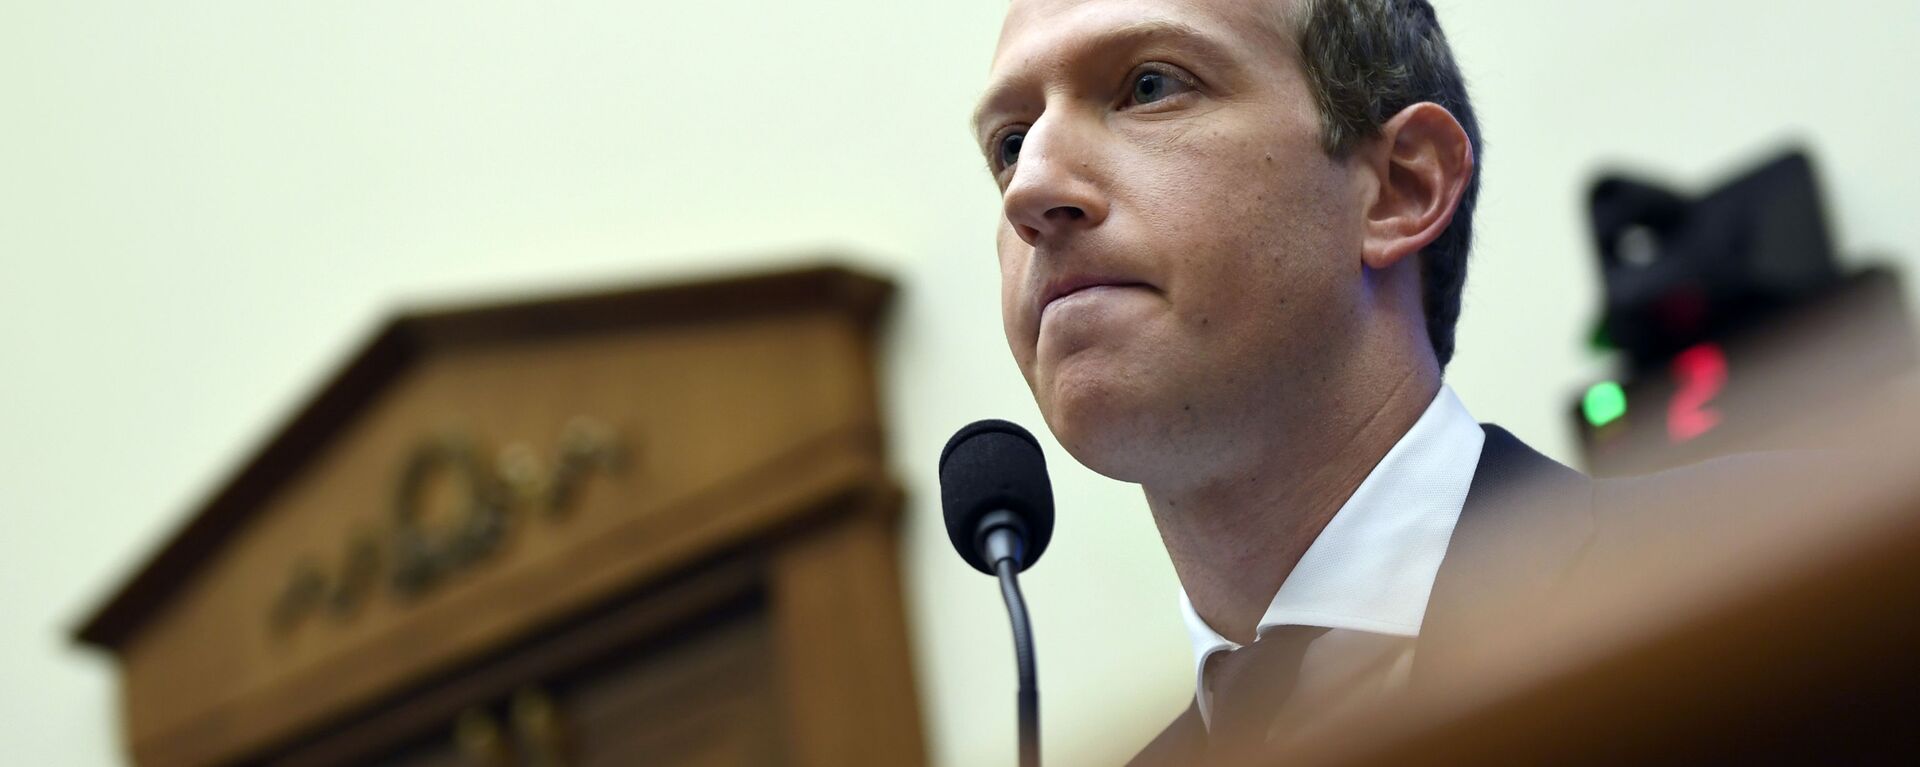 In this Oct. 23, 2019, file photo, Facebook Chief Executive Officer Mark Zuckerberg testifies before the House Financial Services Committee on Capitol Hill in Washington.  Facebook's quasi-independent oversight board last week said the company was justified in suspending Trump because of his role in inciting deadly violence at the U.S. Capitol on Jan. 6, 2021 - Sputnik International, 1920, 04.10.2021